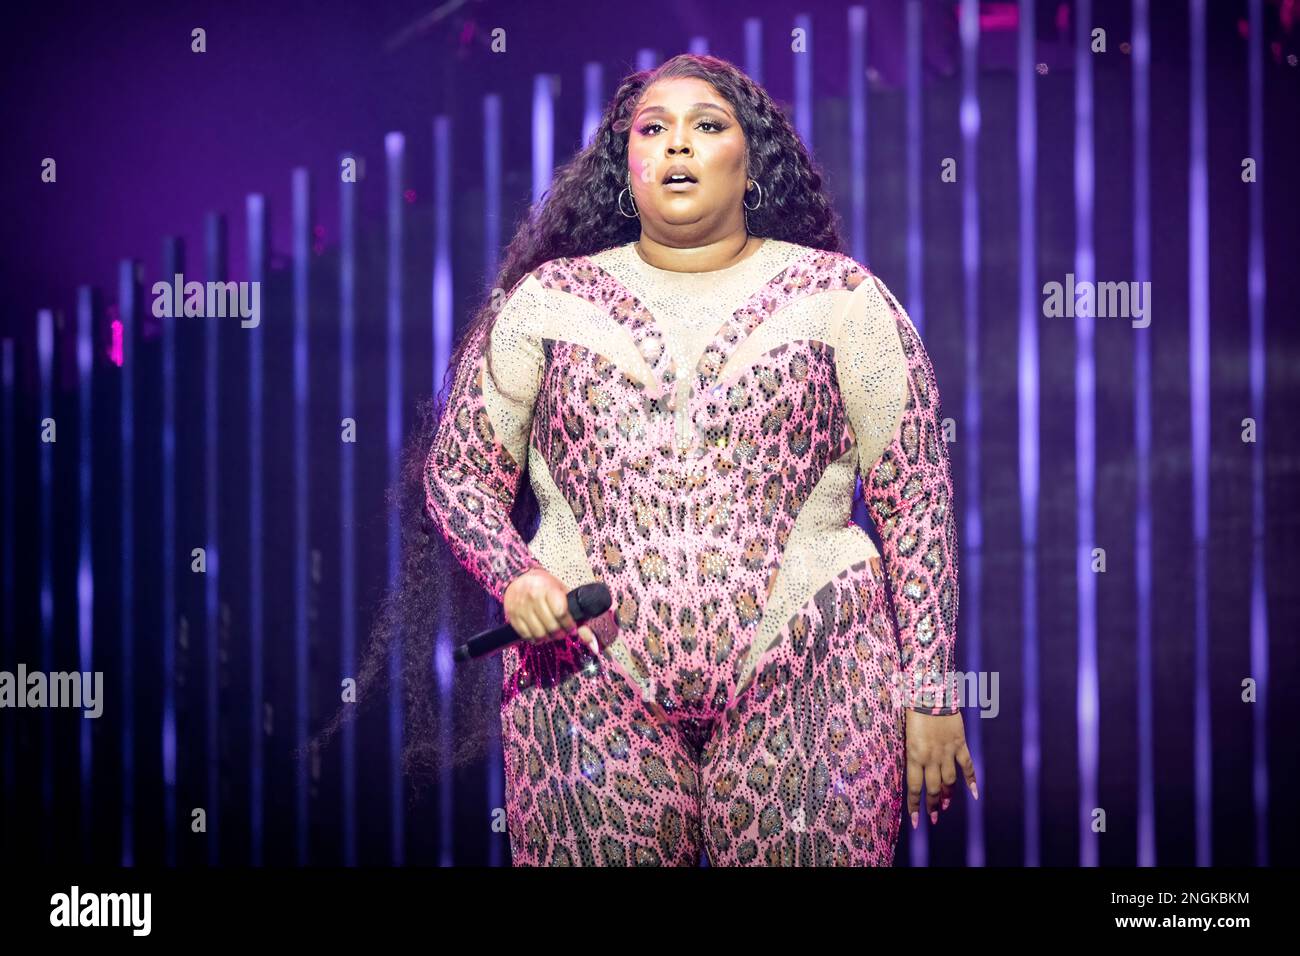 https://c8.alamy.com/comp/2NGKBKM/oslo-norway-17th-feb-2023-the-american-rapper-and-singer-lizzo-performs-a-live-concert-at-oslo-spektrum-in-oslo-photo-credit-gonzales-photoalamy-live-news-2NGKBKM.jpg